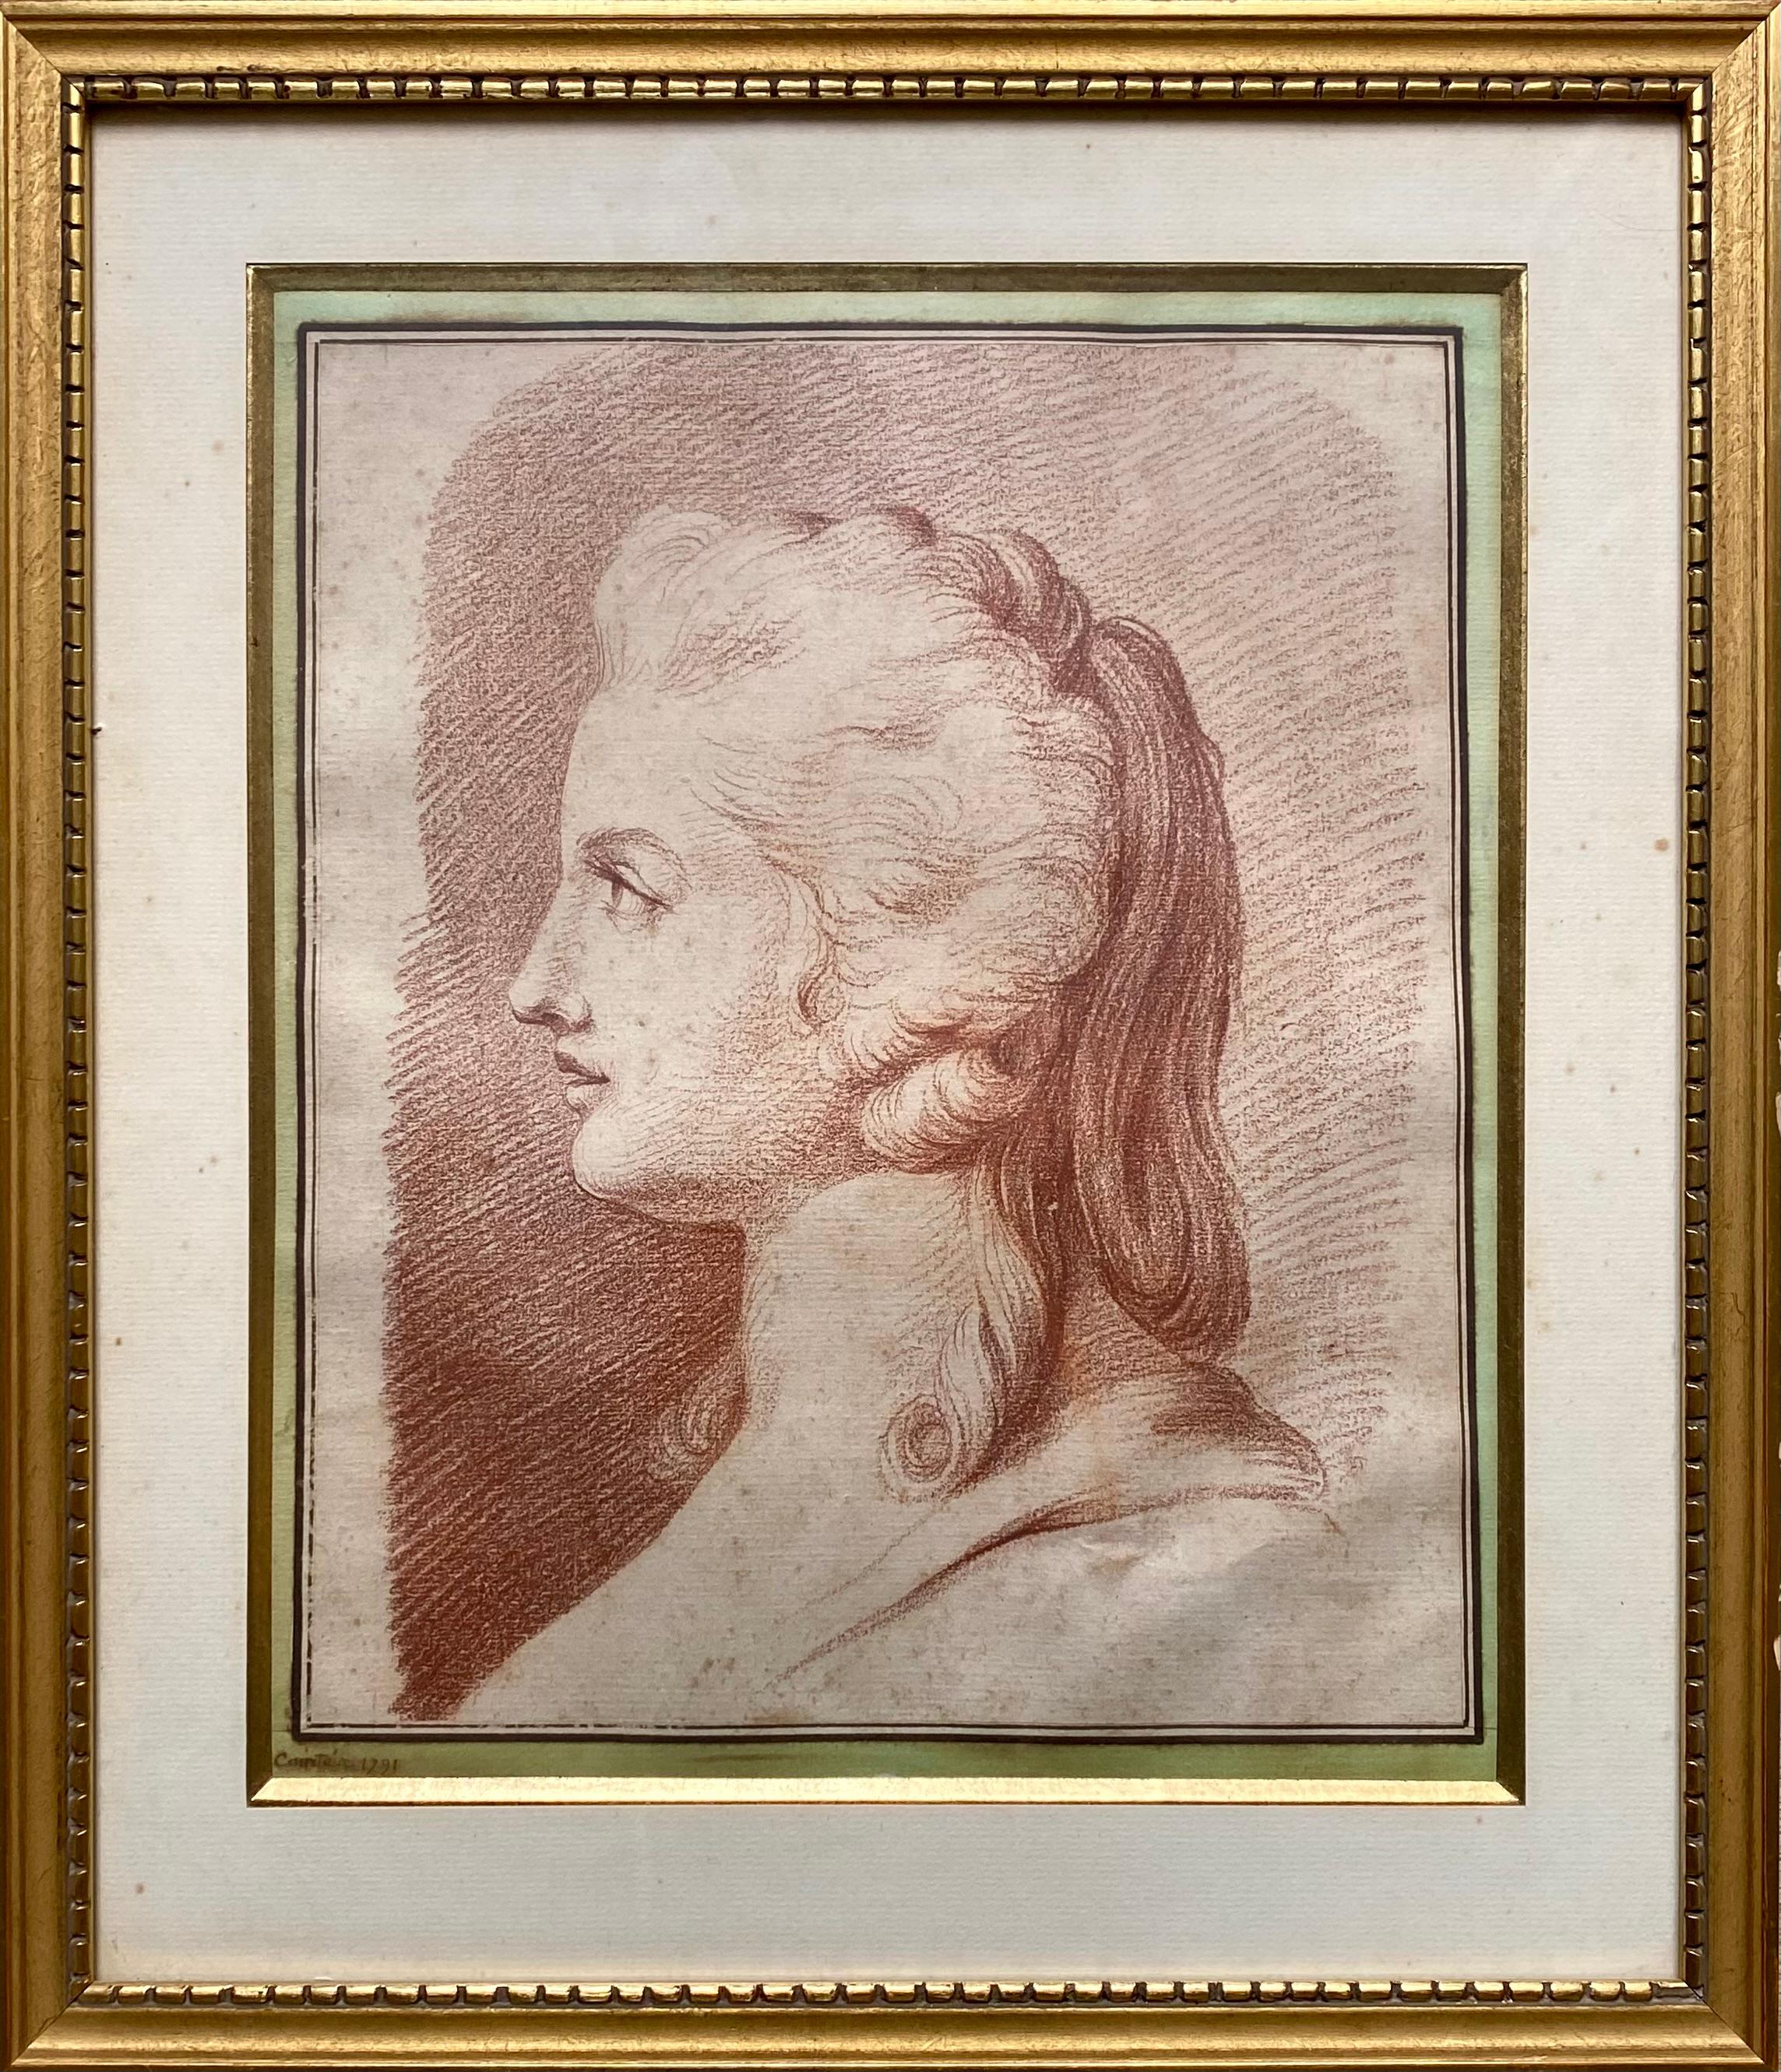 Nicolas-André Courtois Portrait - Bust Of A Woman In Profile, Sanguine On Paper, Signed And Dated